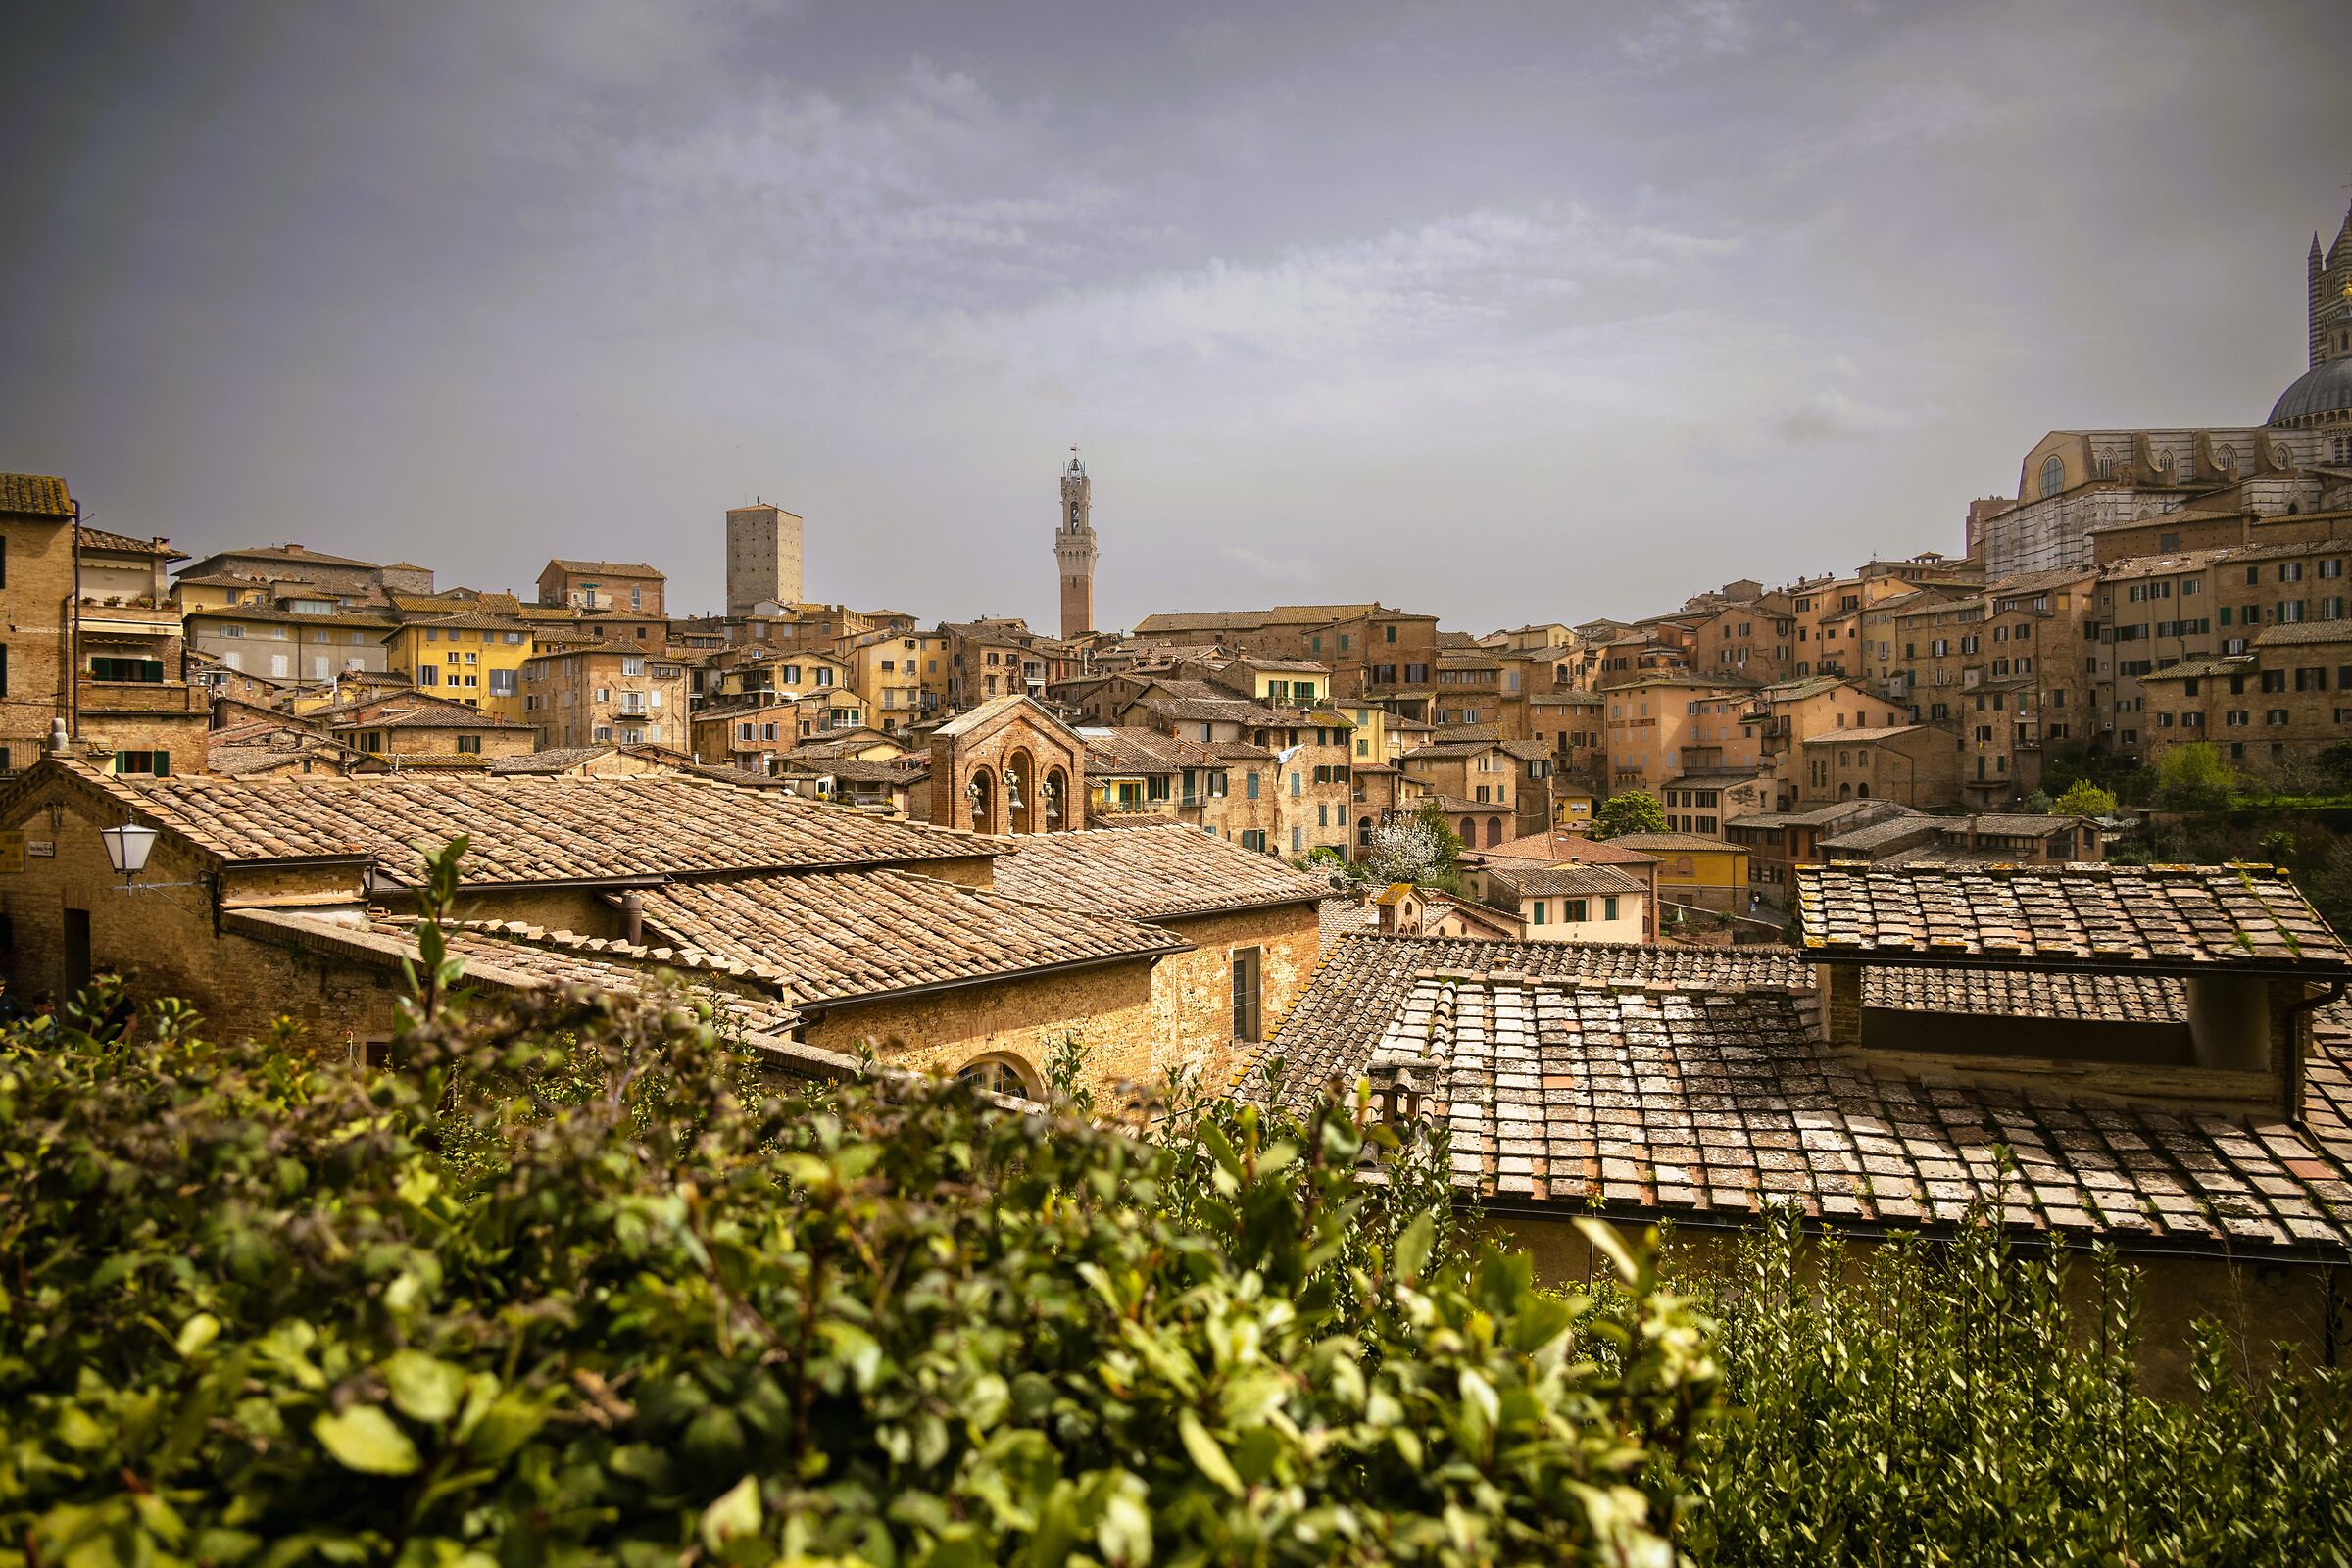 The rooftops of Siena...